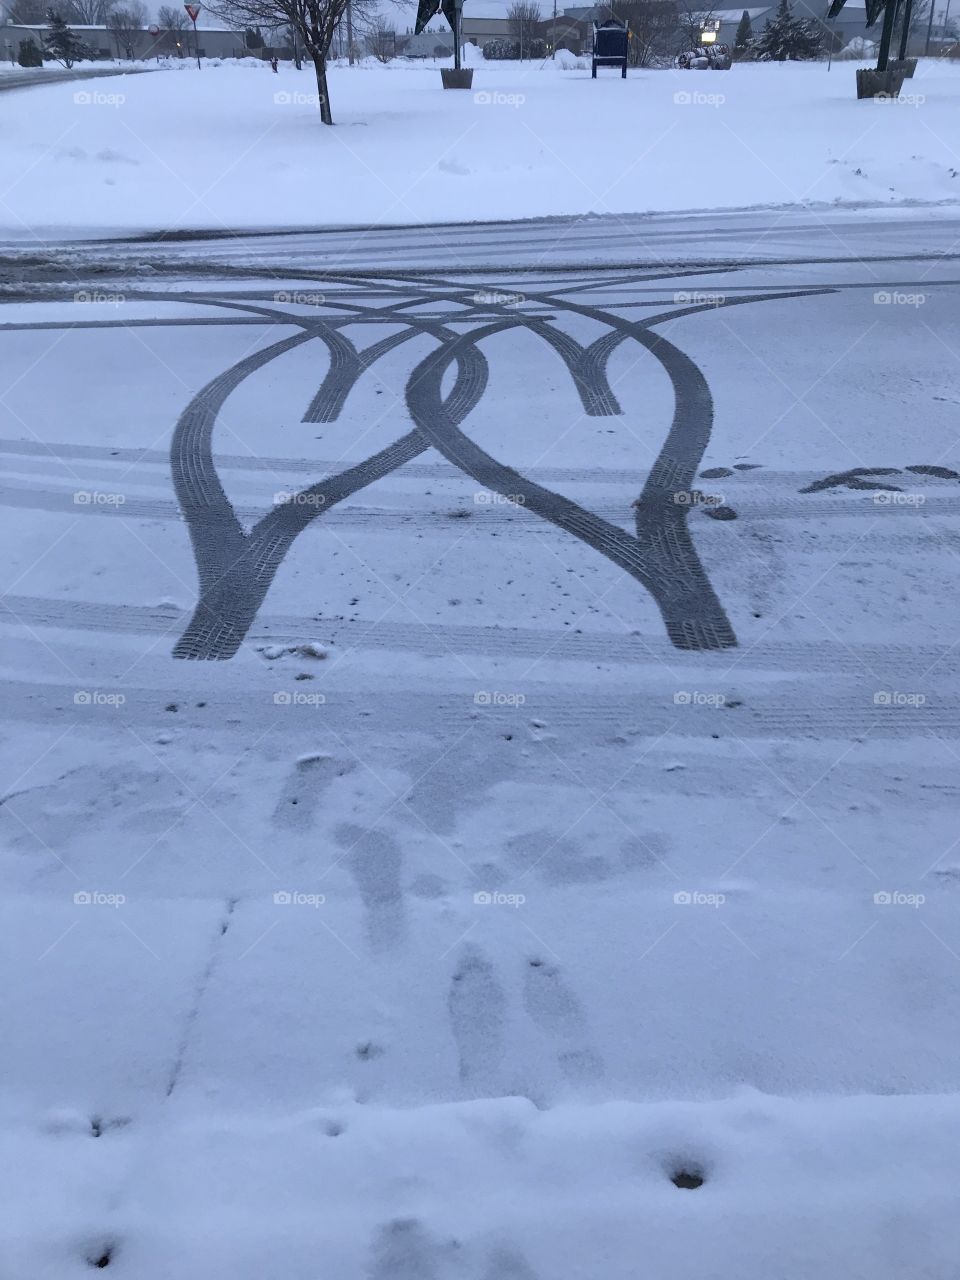 Hearts in the snow